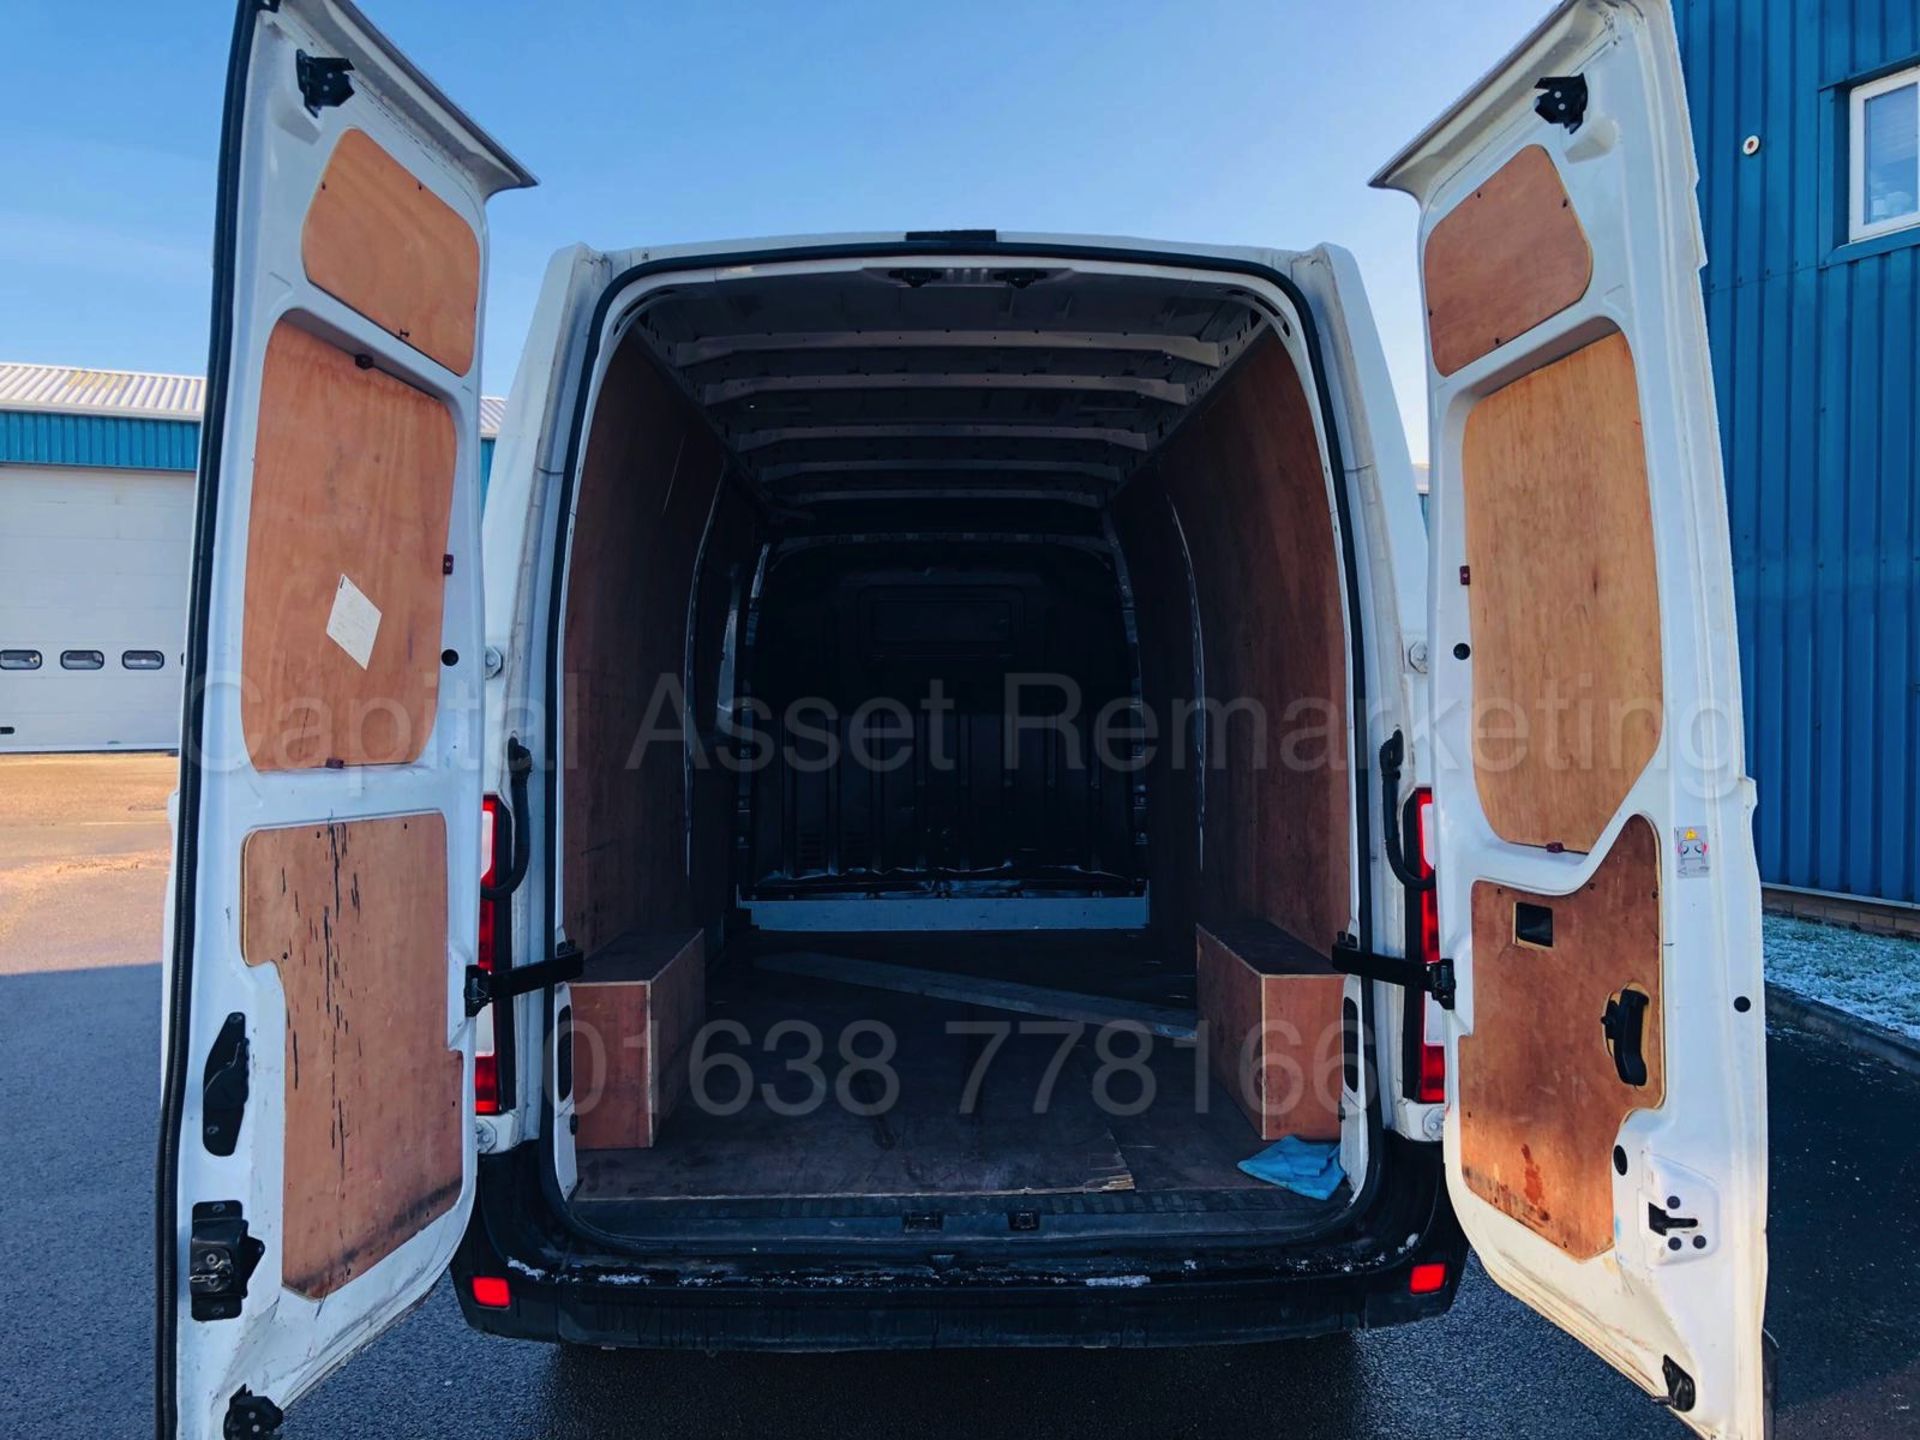 RENAULT MASTER LM35 *LWB - BUSINESS EDITION* (2016) '2.3 DCI - 110 BHP - 6 SPEED' *ULTRA LOW MILES* - Image 15 of 23